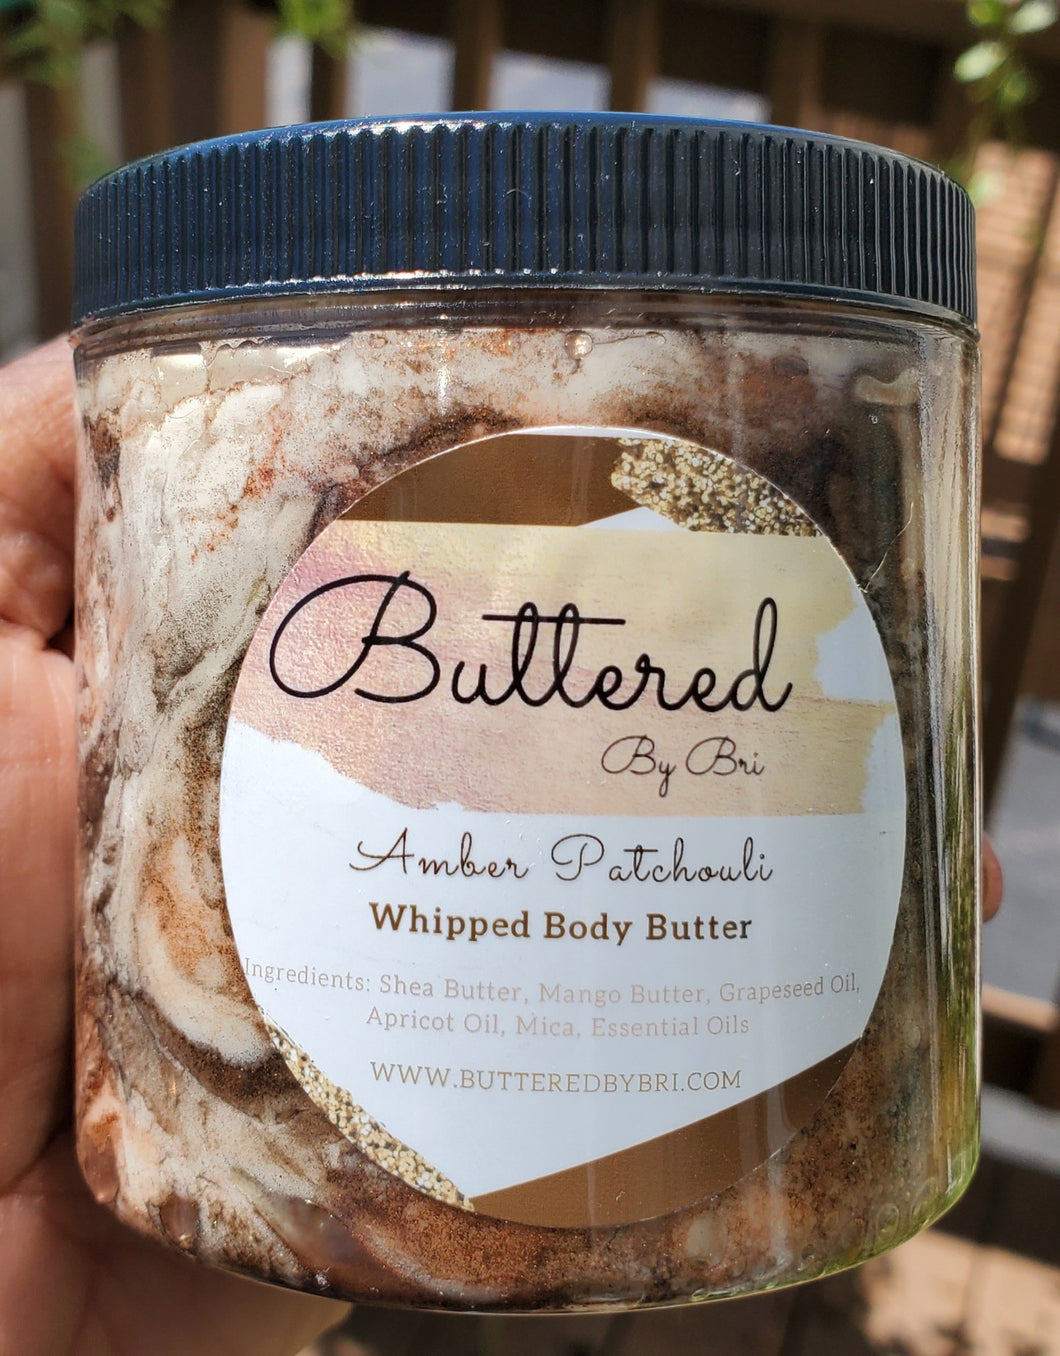 Amber Patchouli Body Butter - Buttered By Bri